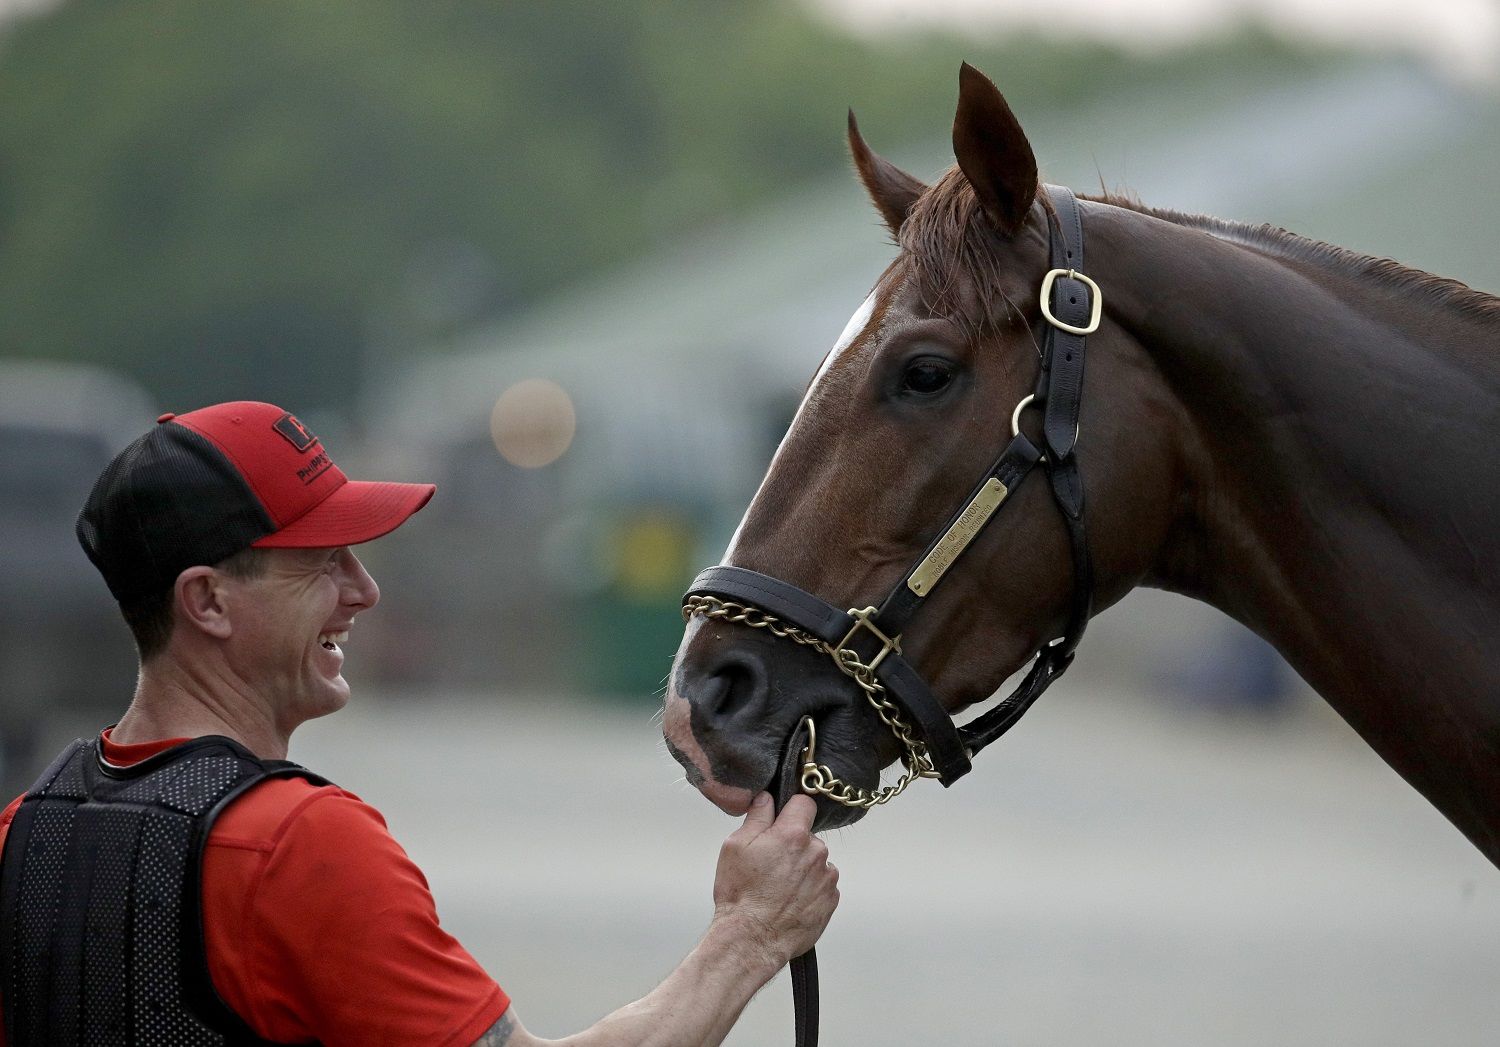 Exercise rider Brian Duggan holds Kentucky Derby hopeful Code of Honor for his bath after a workout at Churchill Downs Tuesday, April 30, 2019, in Louisville, Ky. The 145th running of the Kentucky Derby is scheduled for Saturday, May 4. (AP Photo/Charlie Riedel)